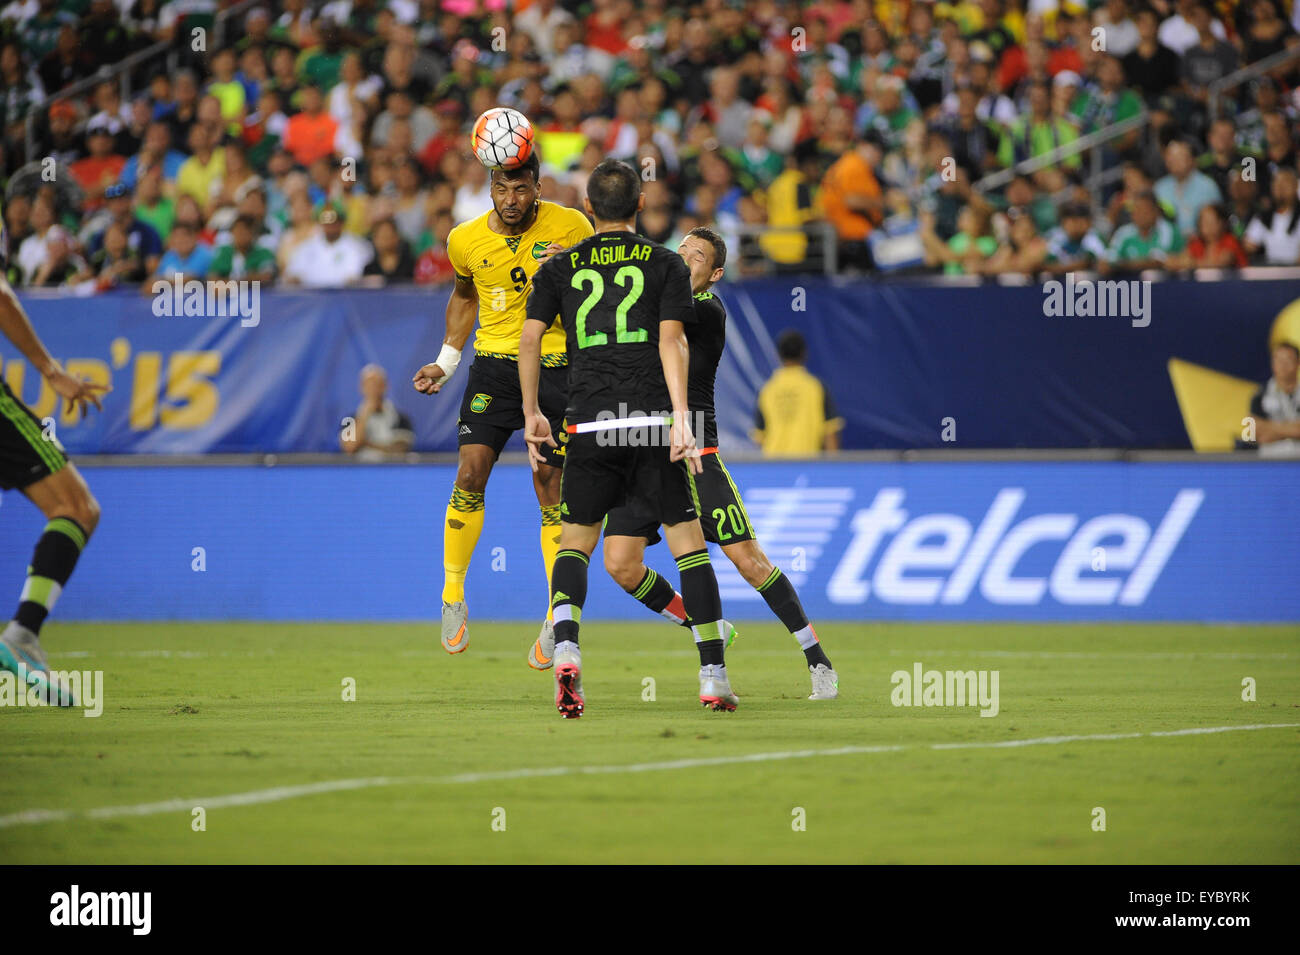 Philadelphia, Pennsylvania, USA. 26th July, 2015. Jamaica player, GILES BARNES, (9) in action against Mexico's PAUL AGUILAR (22) during the final of the Gold Cup The Gold Cup match played at Lincoln Financial Field in Philadelphia Pa (Credit Image: © Ricky Fitchett via ZUMA Wire) Stock Photo